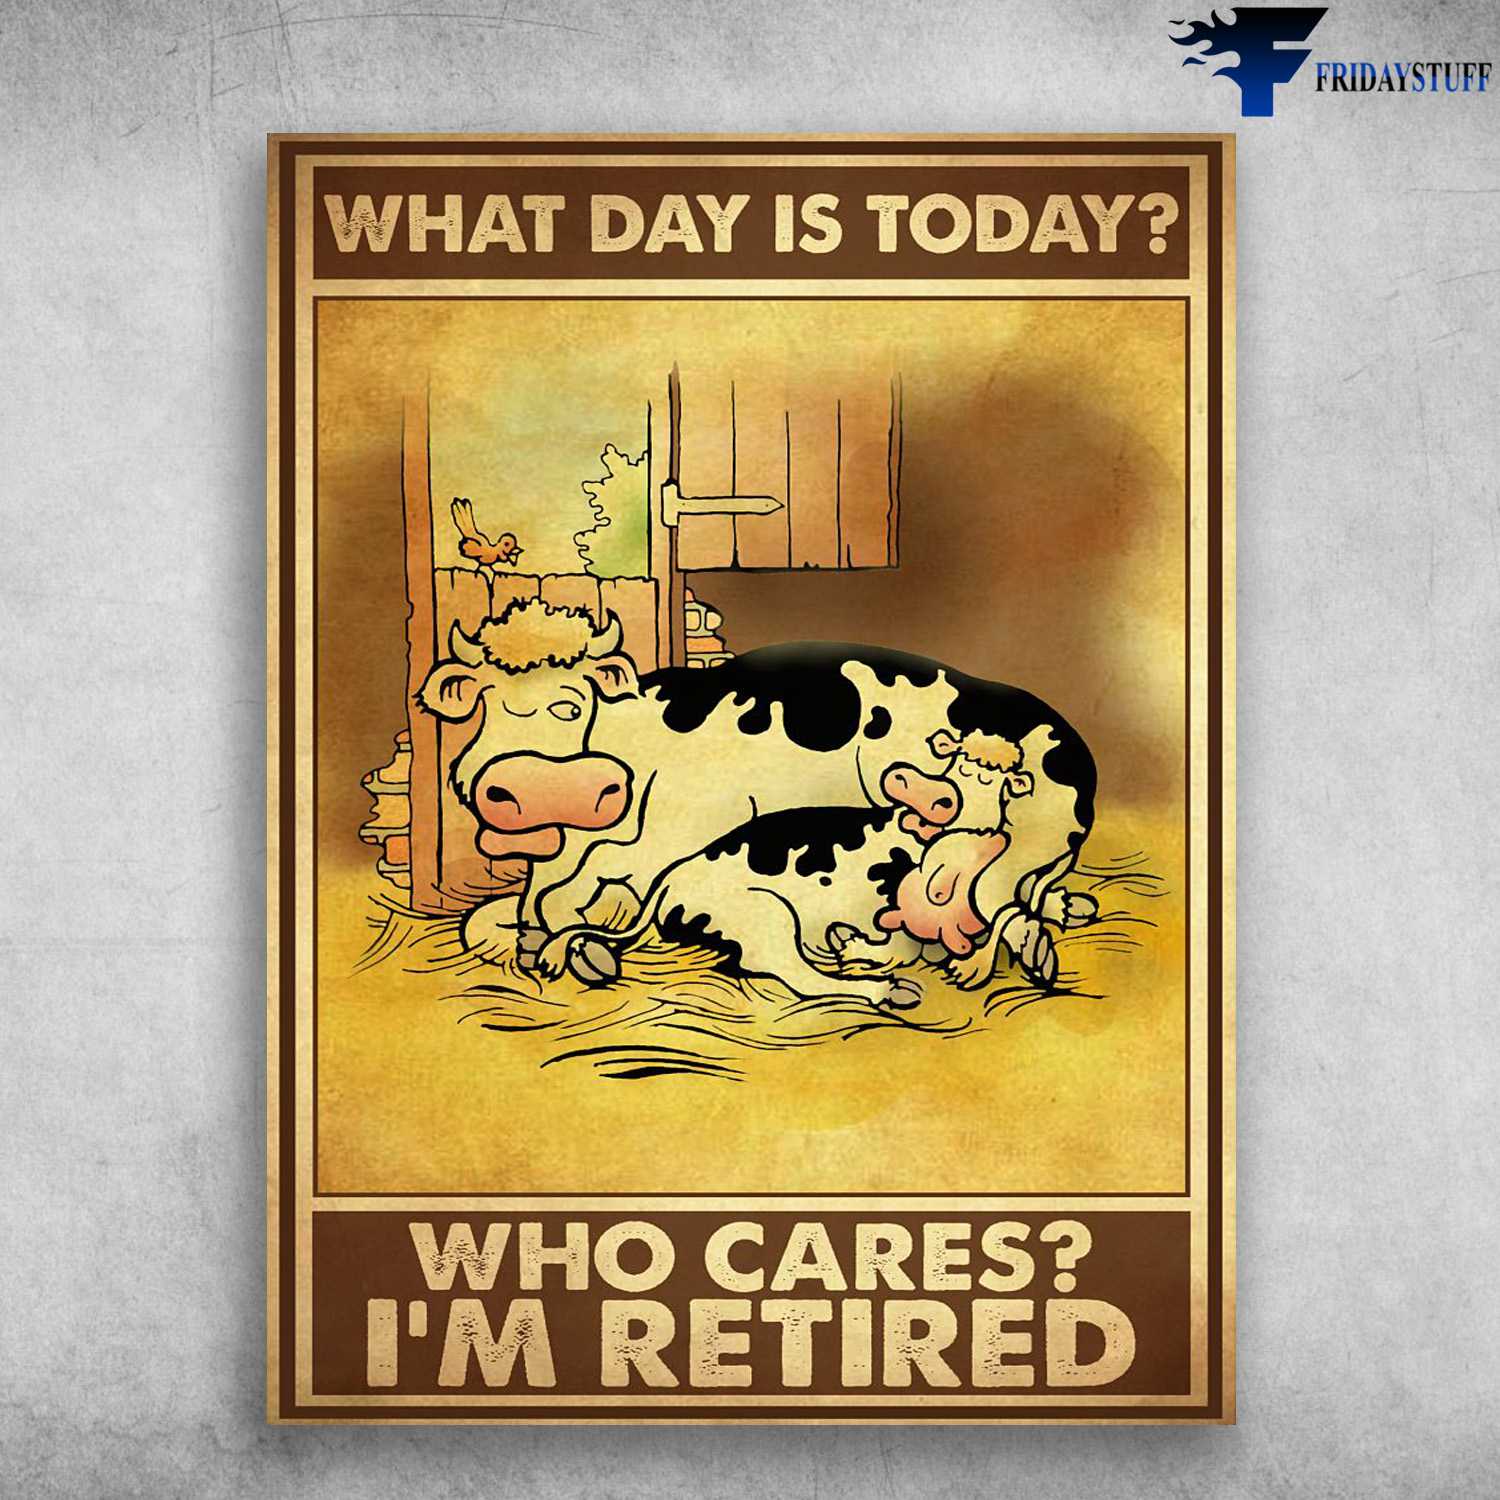 Dairy Cow, Farmer Poster - What Day Is Today, Who Cares, I'm Retired